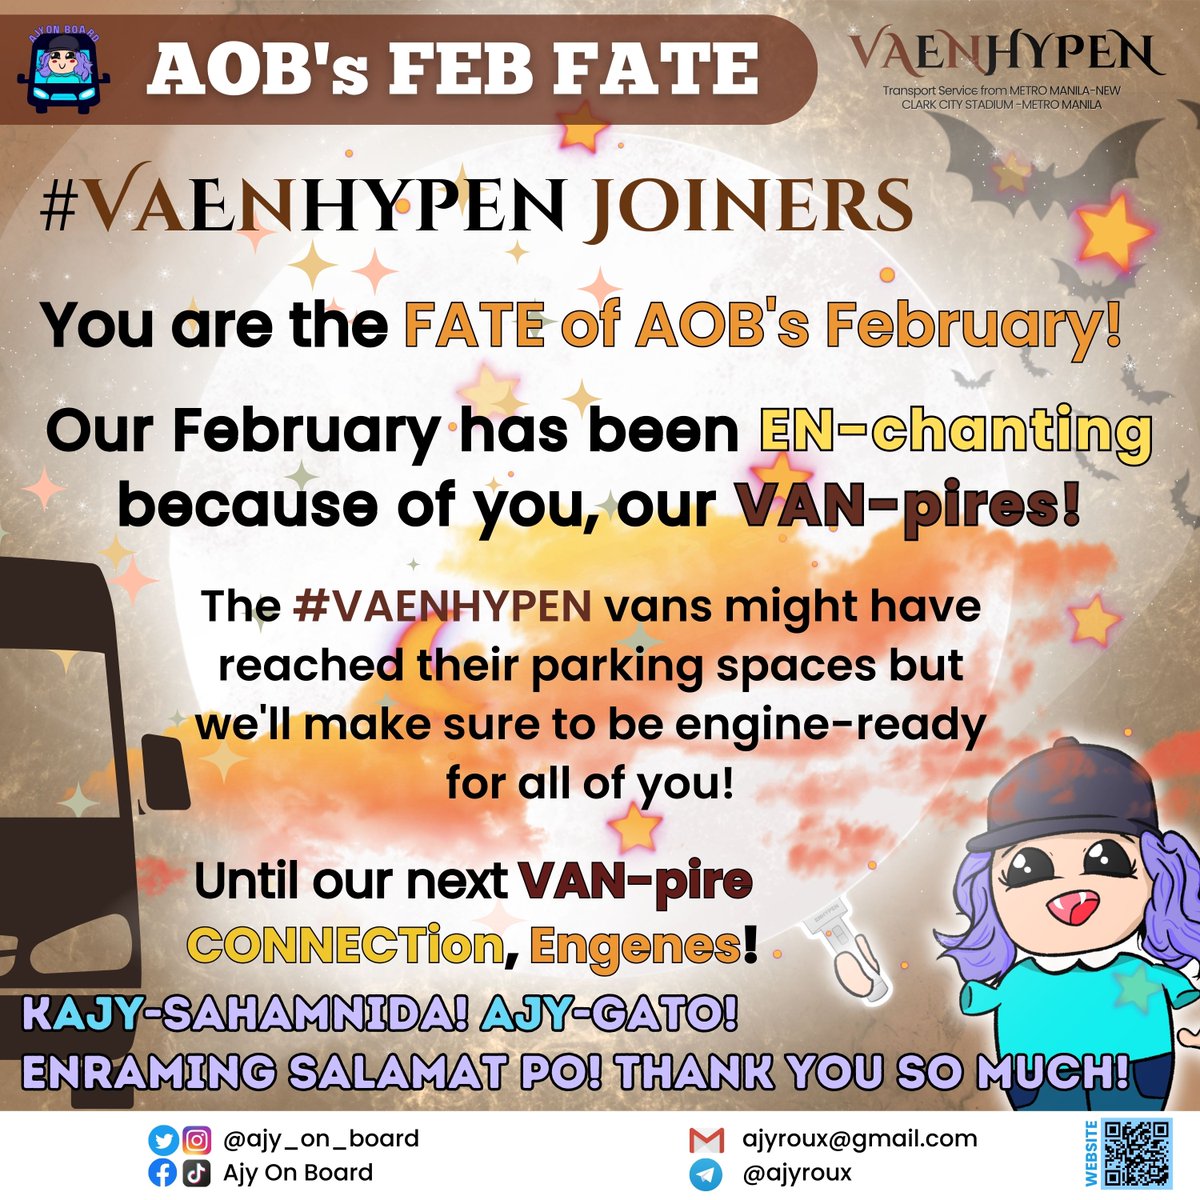 It has been an AOBmazing AOBventure with all of you #SeVANteen², #ViVANManila, #VANCT127, & #VAENHYPEN joiners! 🤗 Our vans might have reached their parking spaces but we'll be ready to have you all aboard again! 🫶🏻 Until our next boarding! 🫡 #AjyOnBoard